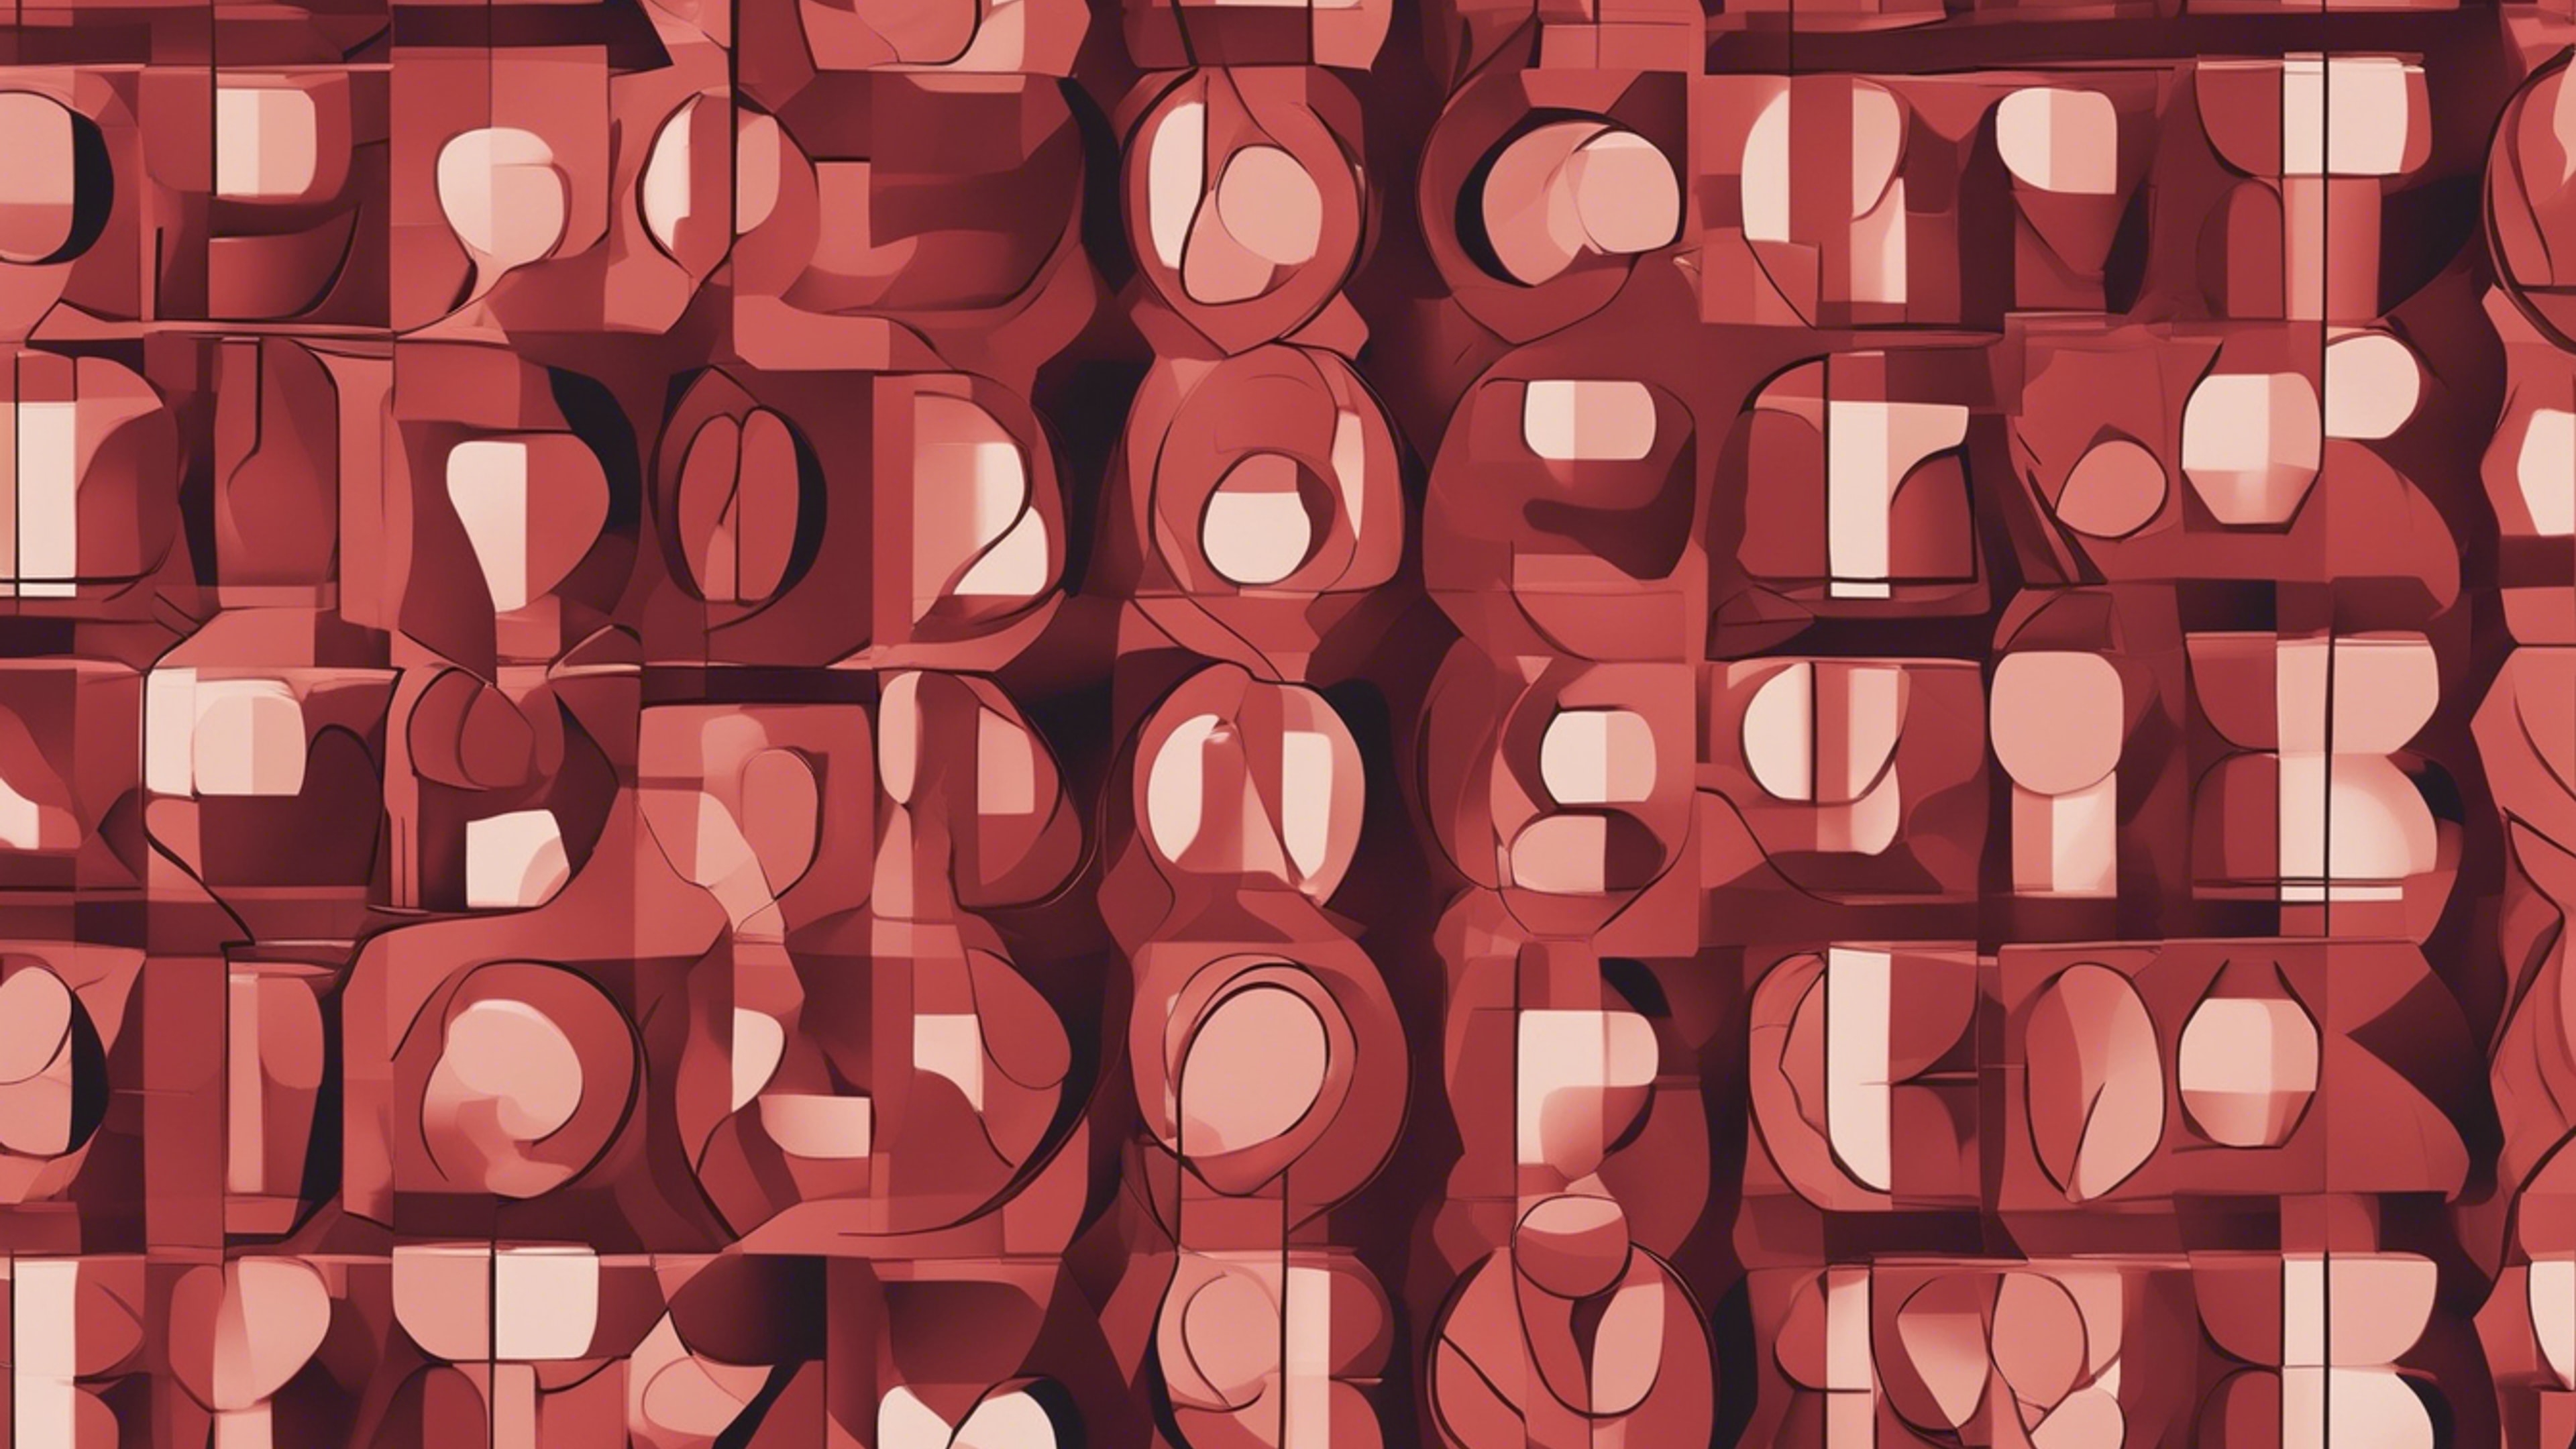 Cubist artwork in rouge and cocoa, effortlessly repeating to present a modern, abstract pattern. Wallpaper[8d05fed6b2b34d37b667]